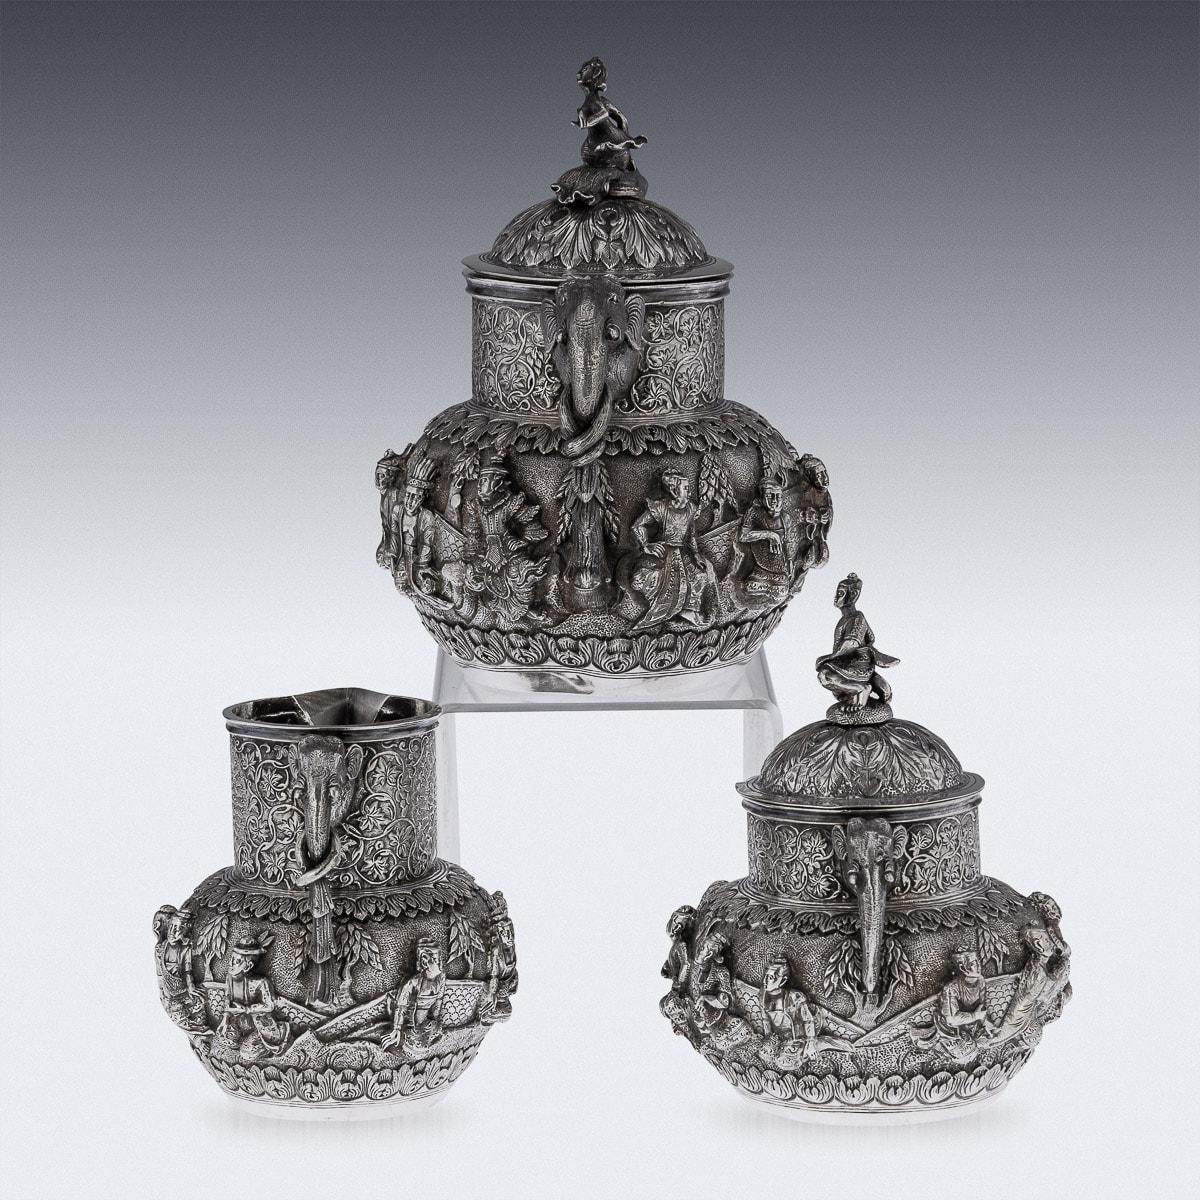 Antique late-19th Century Burmese colonial solid silver three piece tea set, comprising of teapot, lidded sugar bowl, and creram jug, each piece is highly-decorative, chased and repoussed with a continous scene from Burmese mythology, applied with a